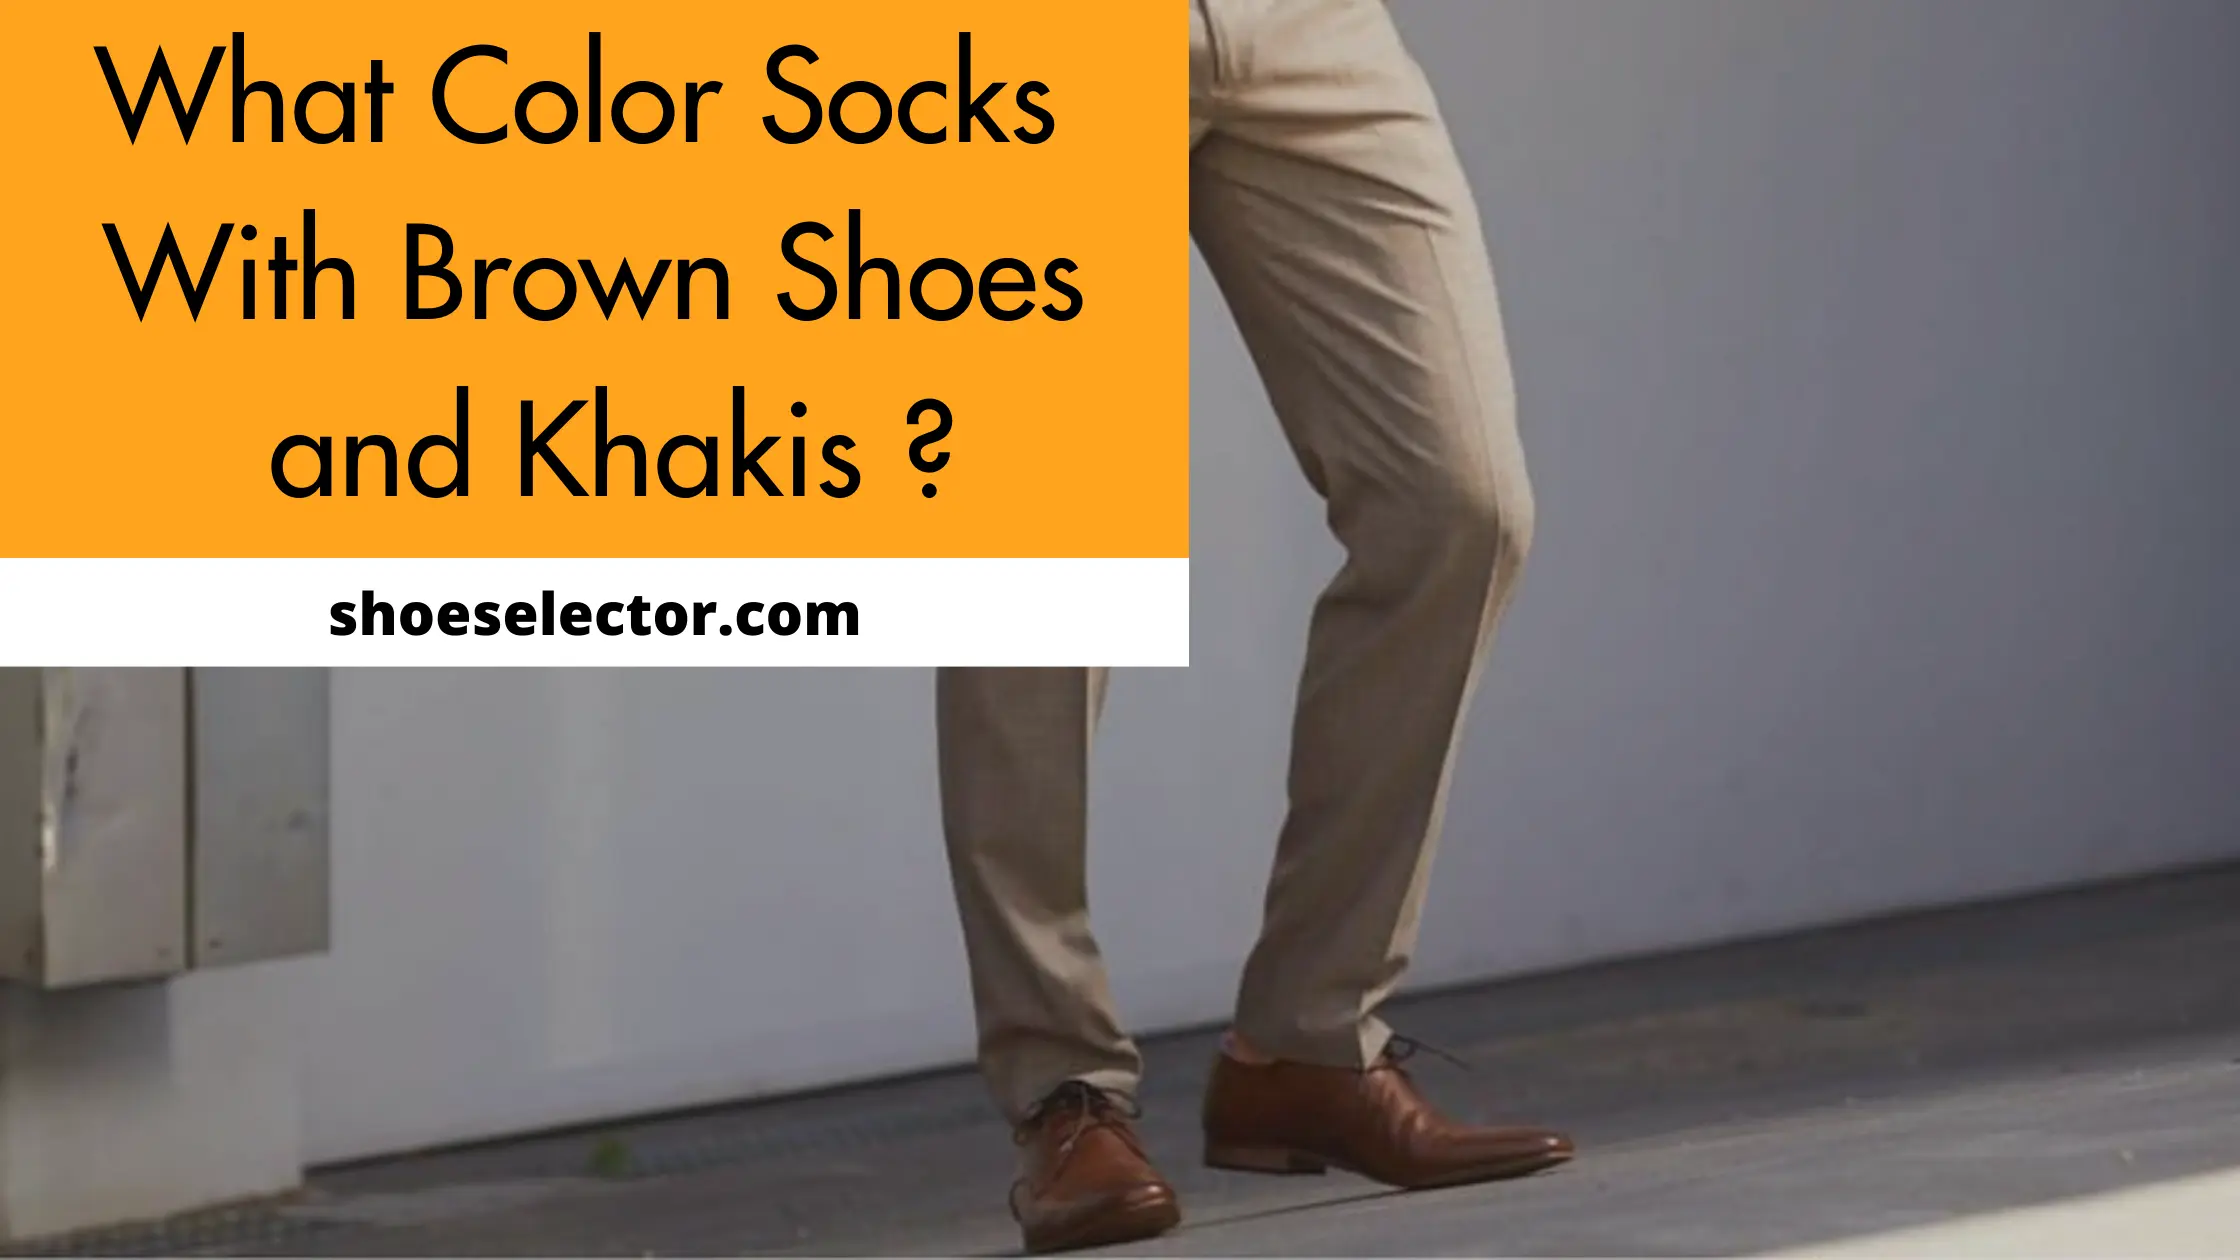 What Color Socks With Brown Shoes And Khakis? Pro Guide